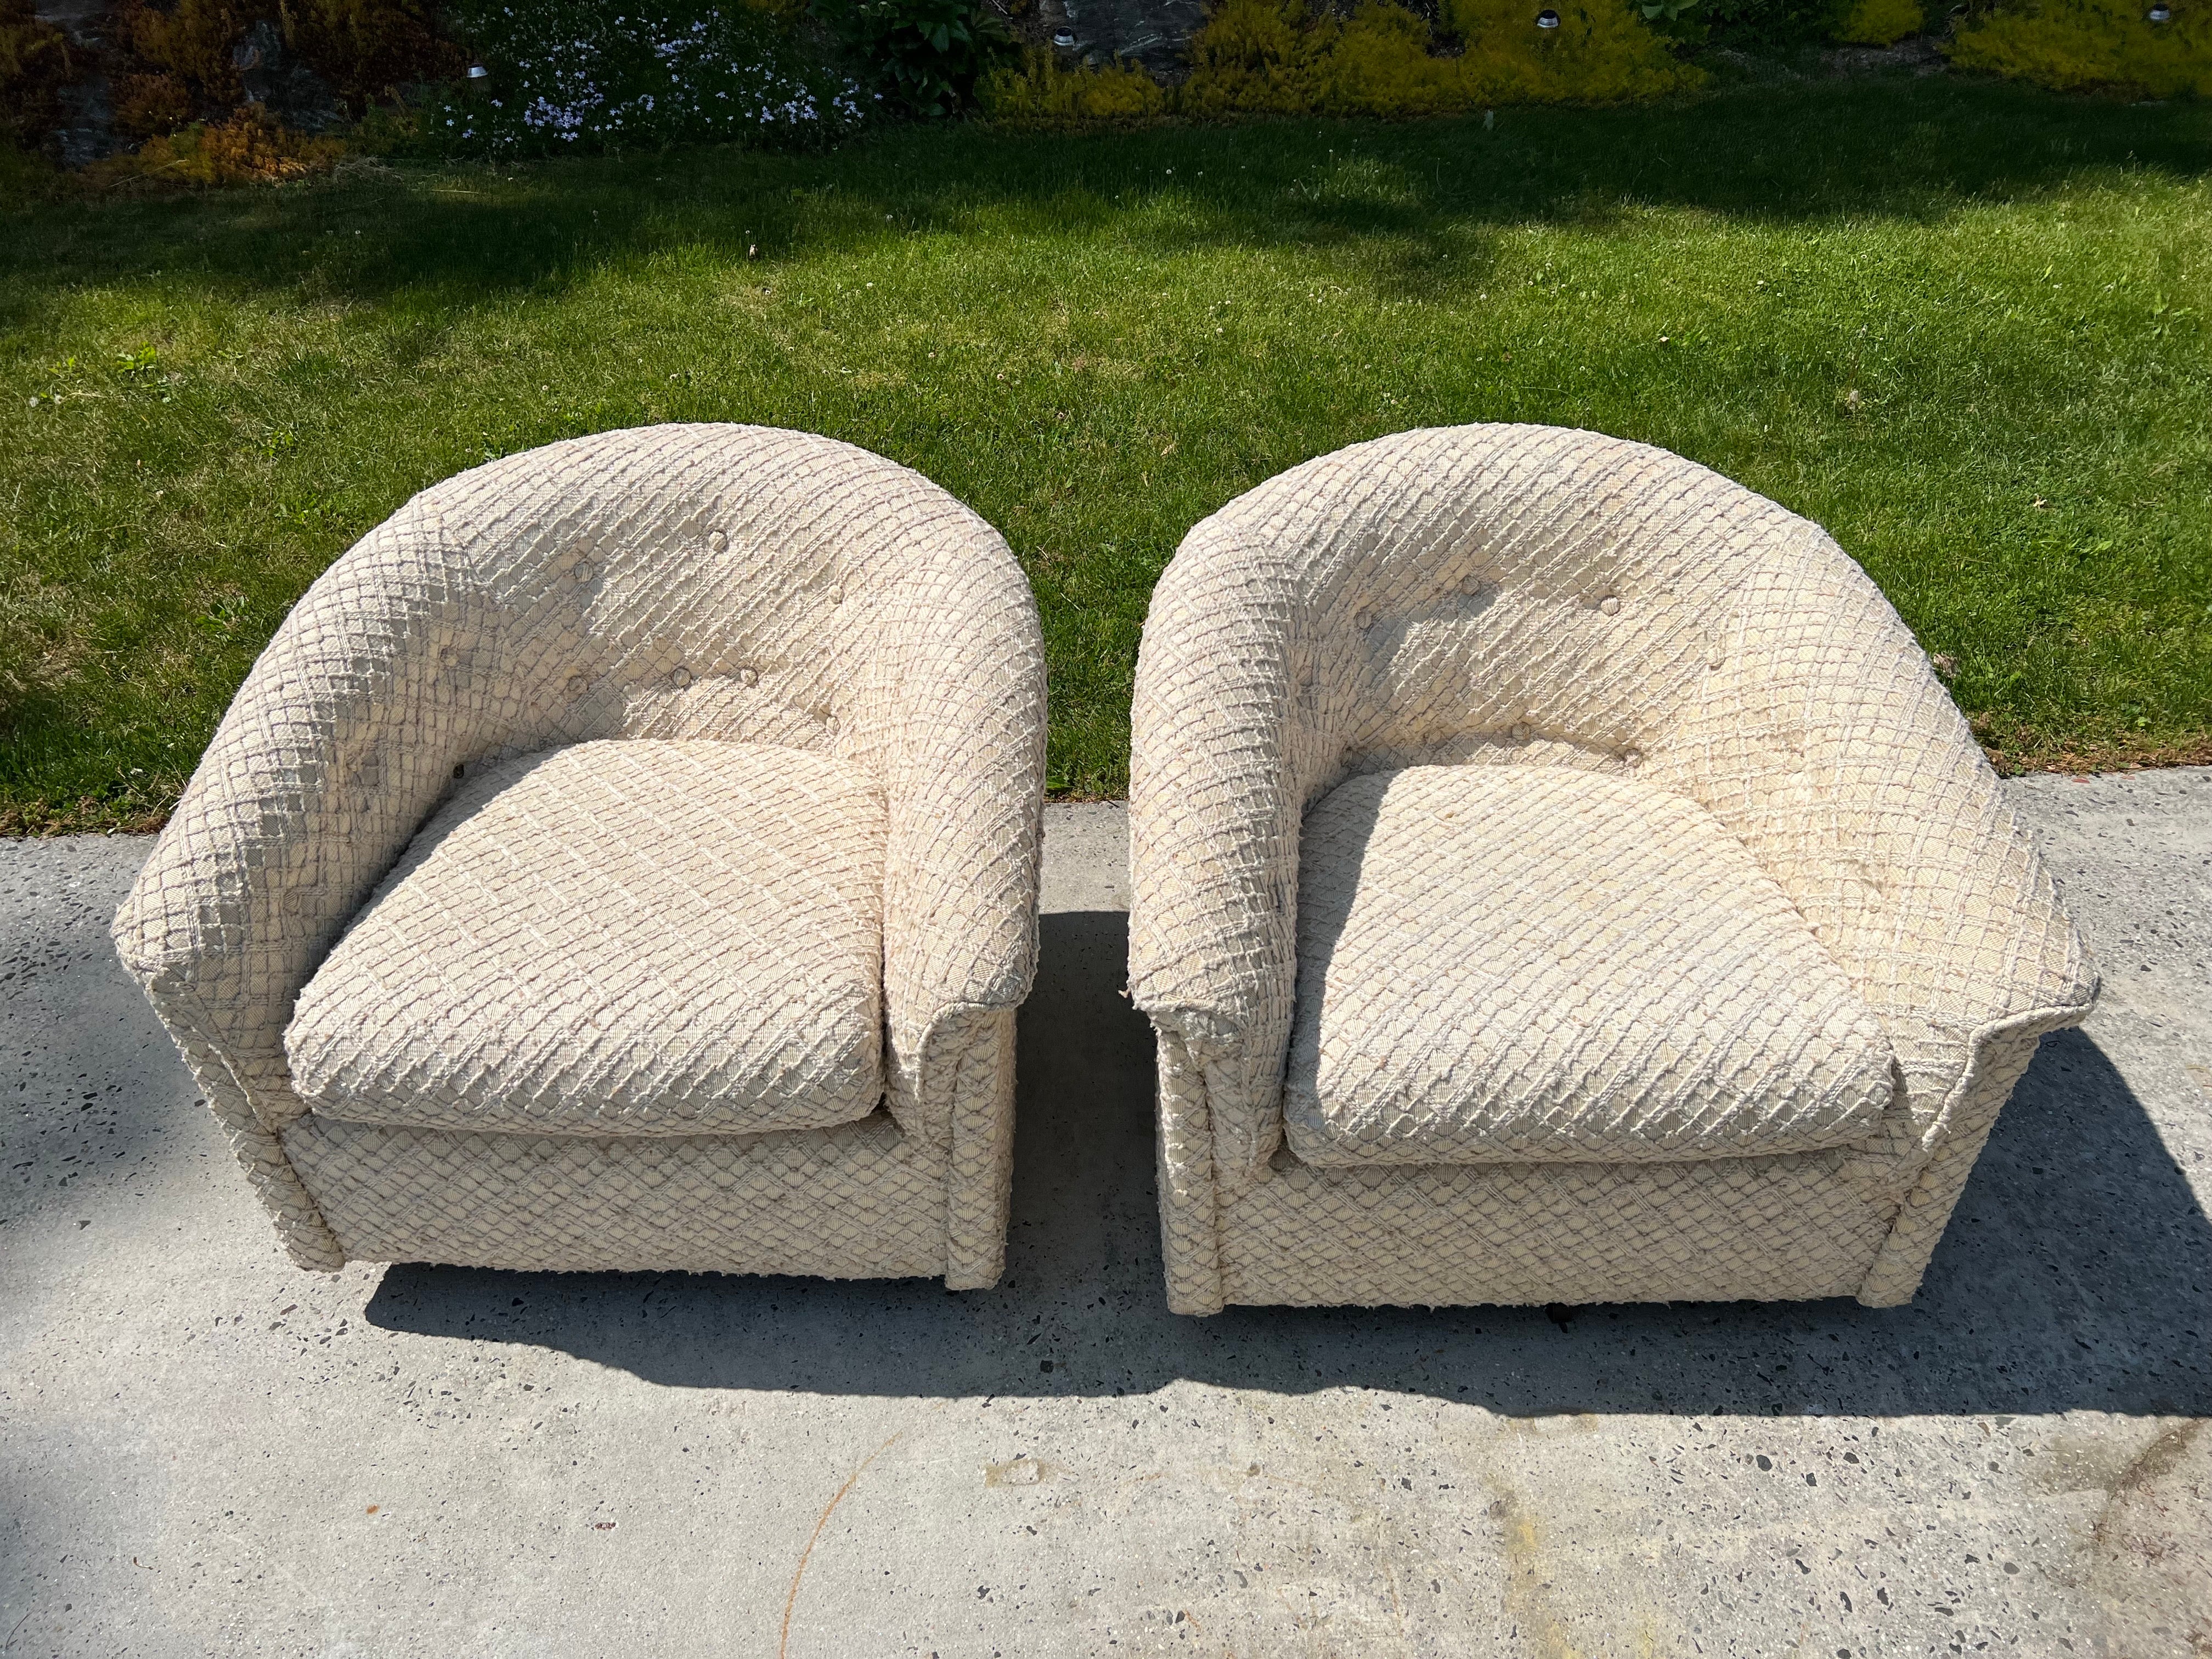 Pair of Solid 1970s Cream textured Swivel Chairs. Solid, well-made structured chairs. Great low profile and cube shape with woven textured cream upholstery. made by Stuart Furniture Industries. 
In 1963 Stuart Love established an upholstery